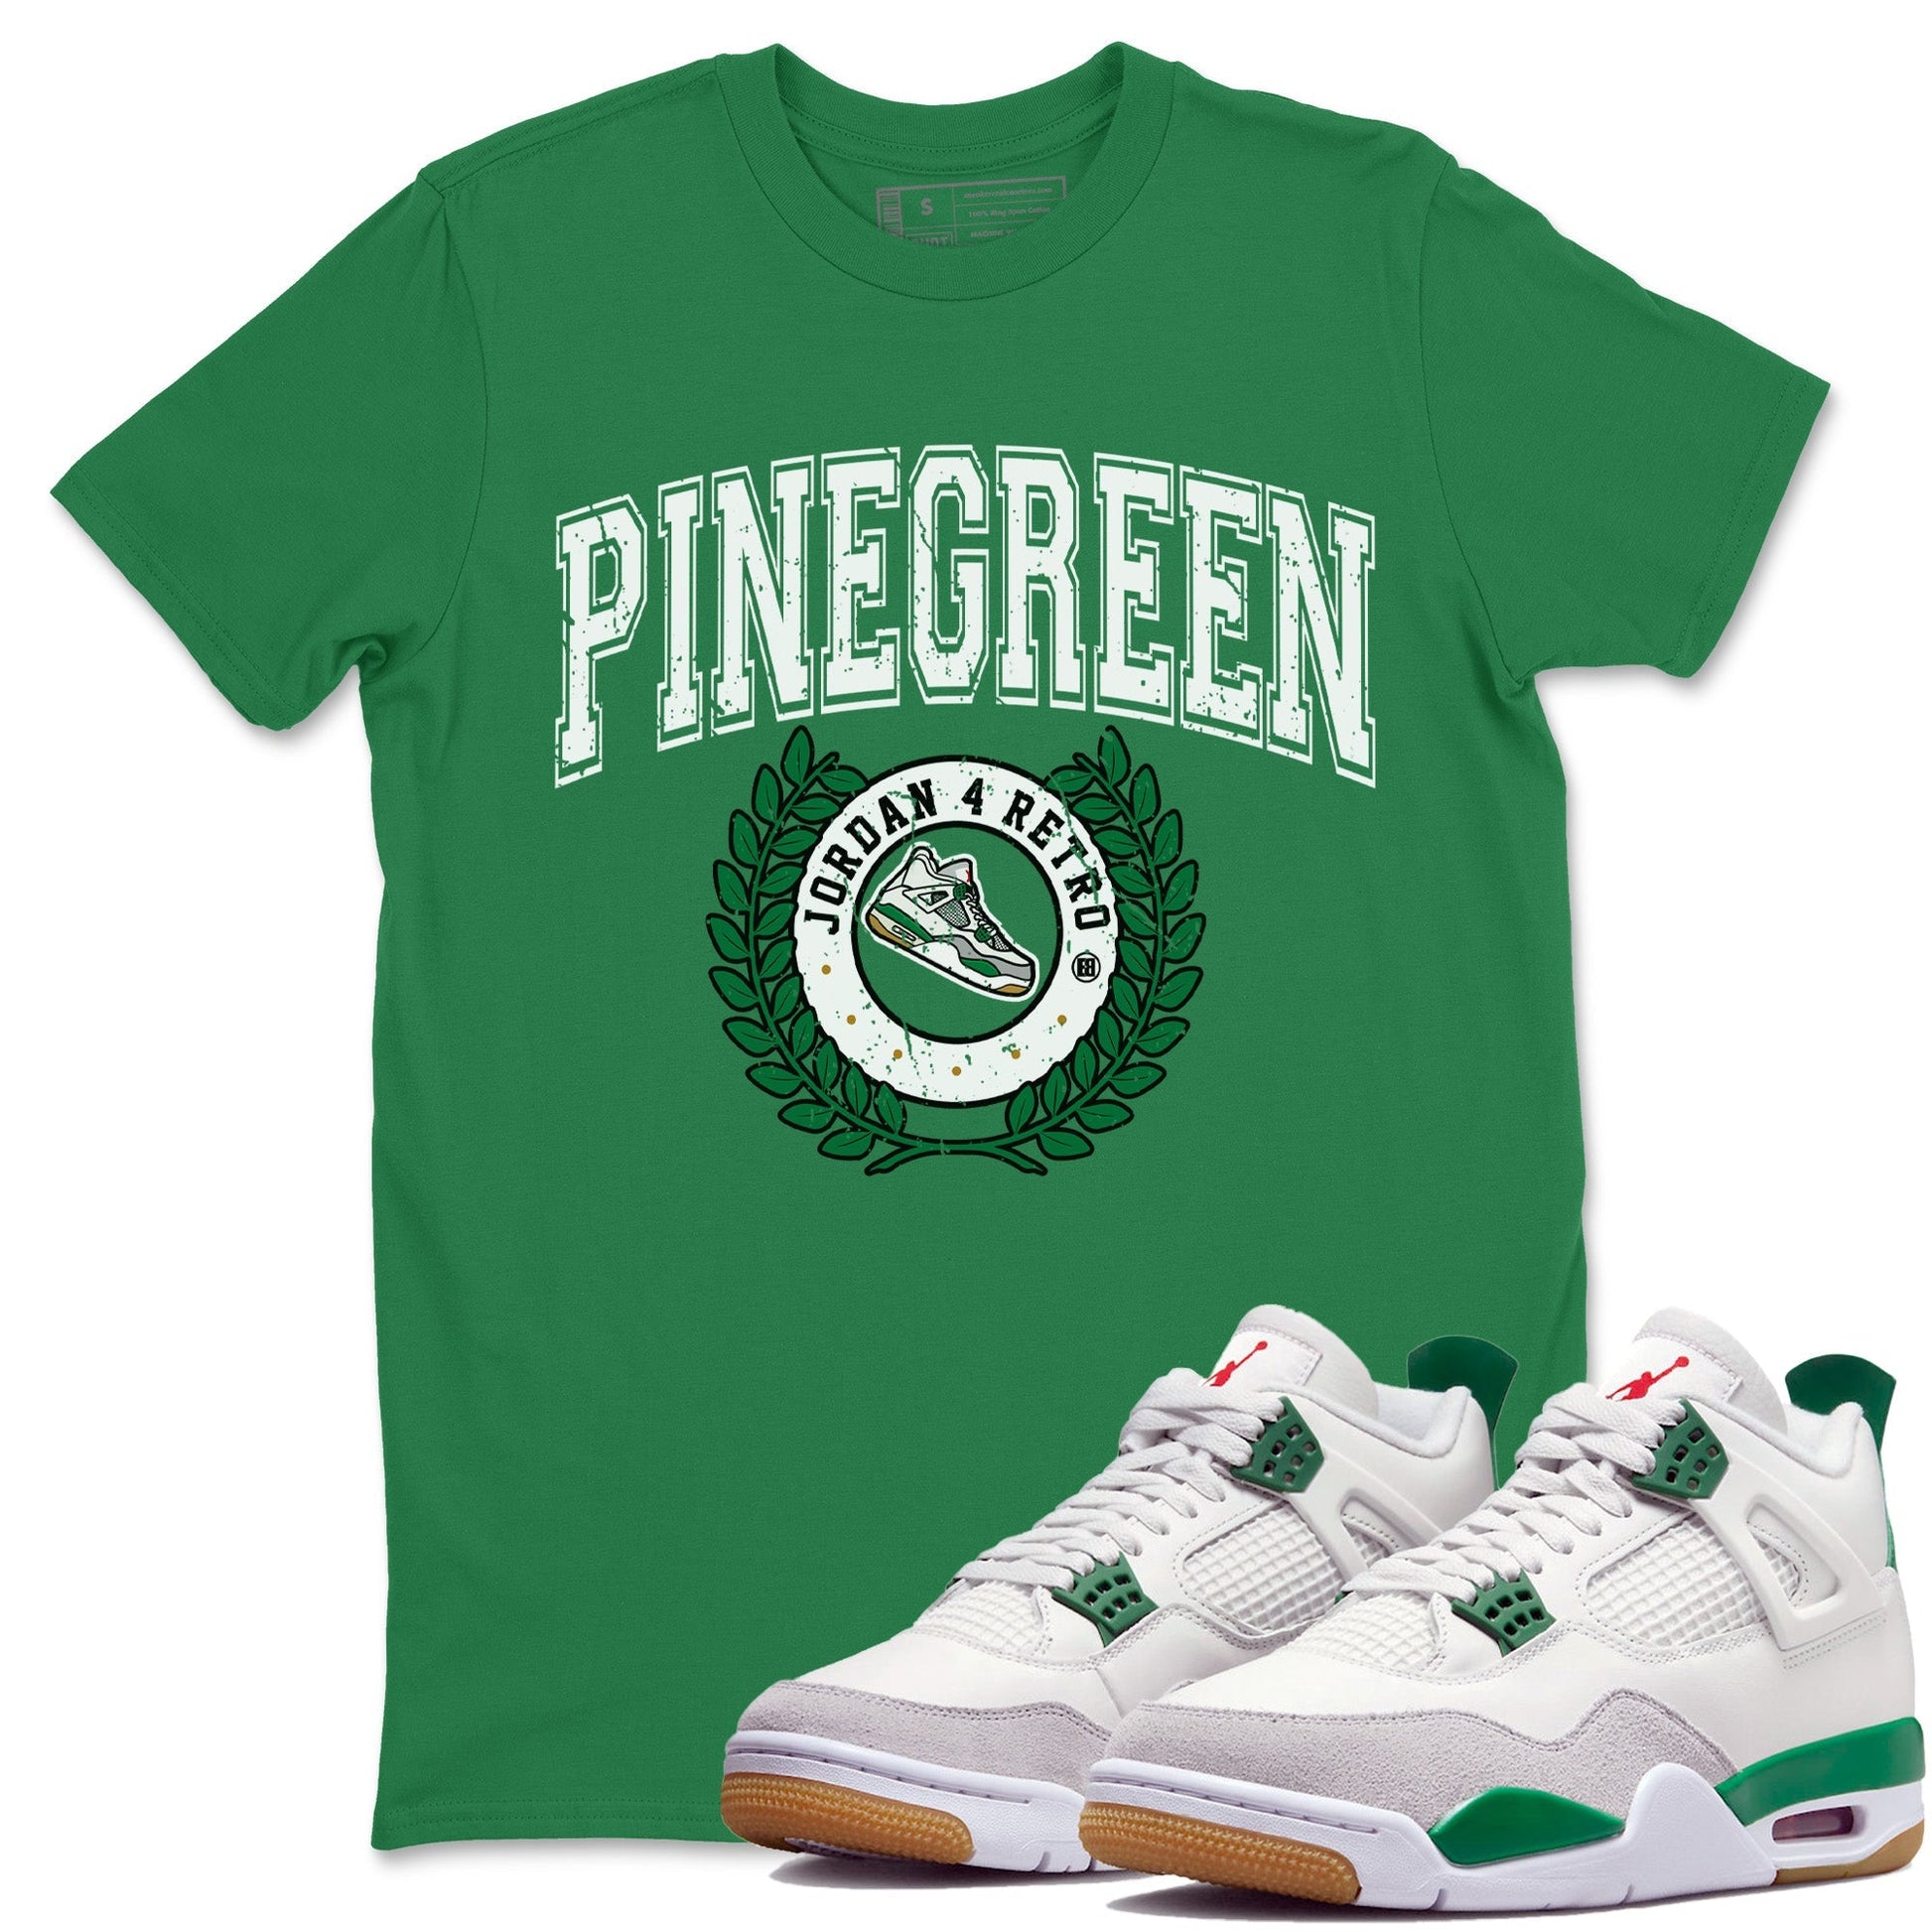 Air Jordan 4 Pine Green Sneaker Letter Crew Neck Sneaker Tees Nike SB Air Jordan 4 Pine Green Sneaker T-Shirts Washing and Care Tip